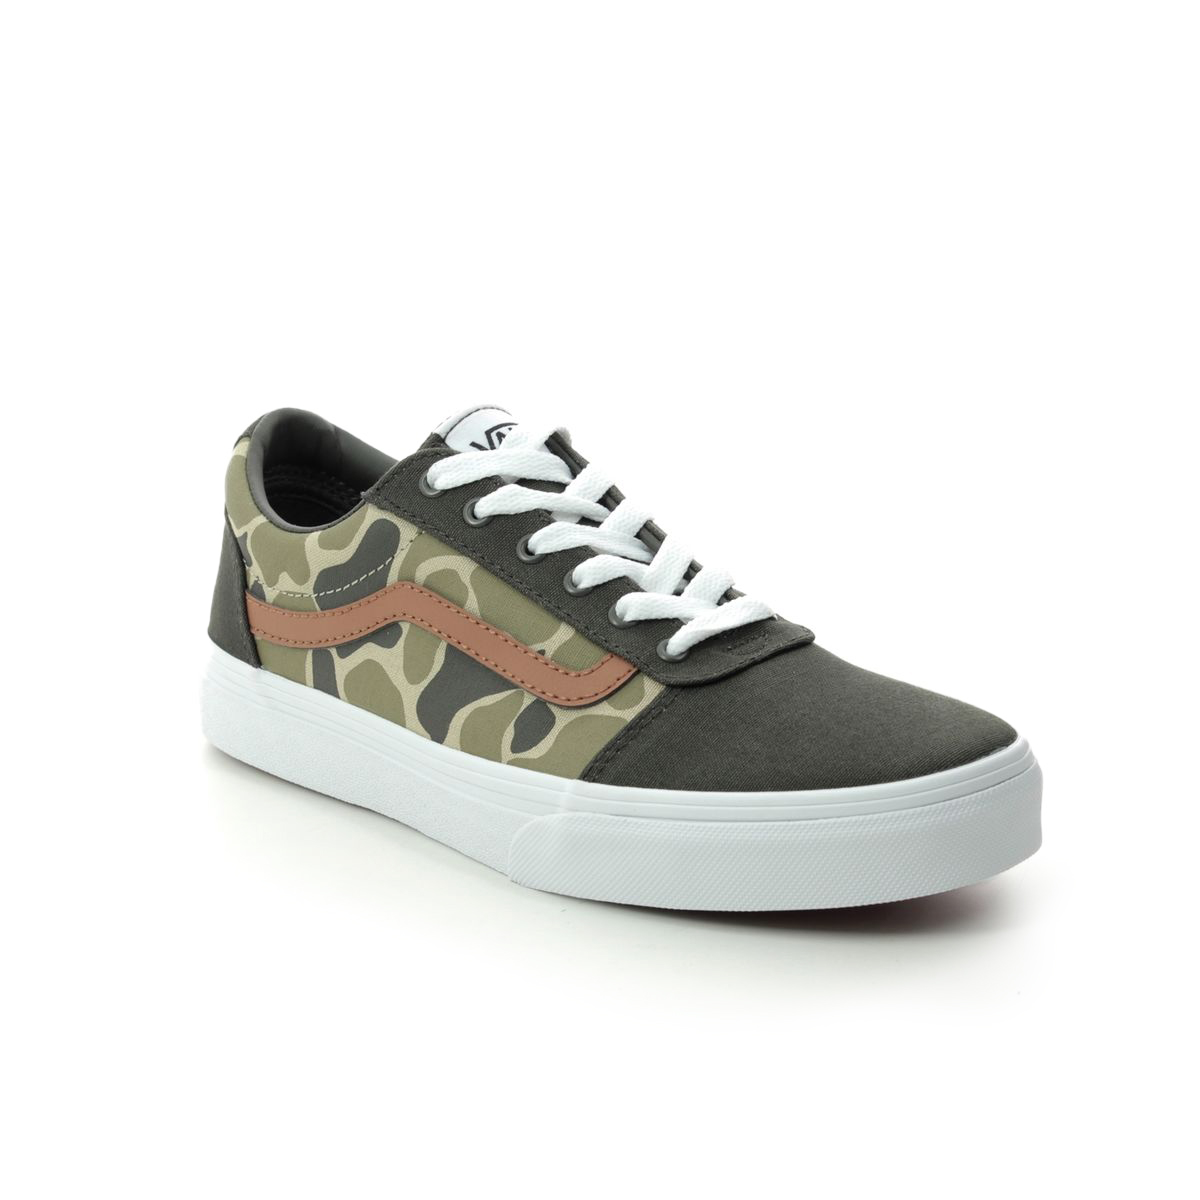 Vans Ward Yth Camo Green Kids Boys Trainers VN0A38J9W-LZ1 in a Camouflage Canvas in Size 5